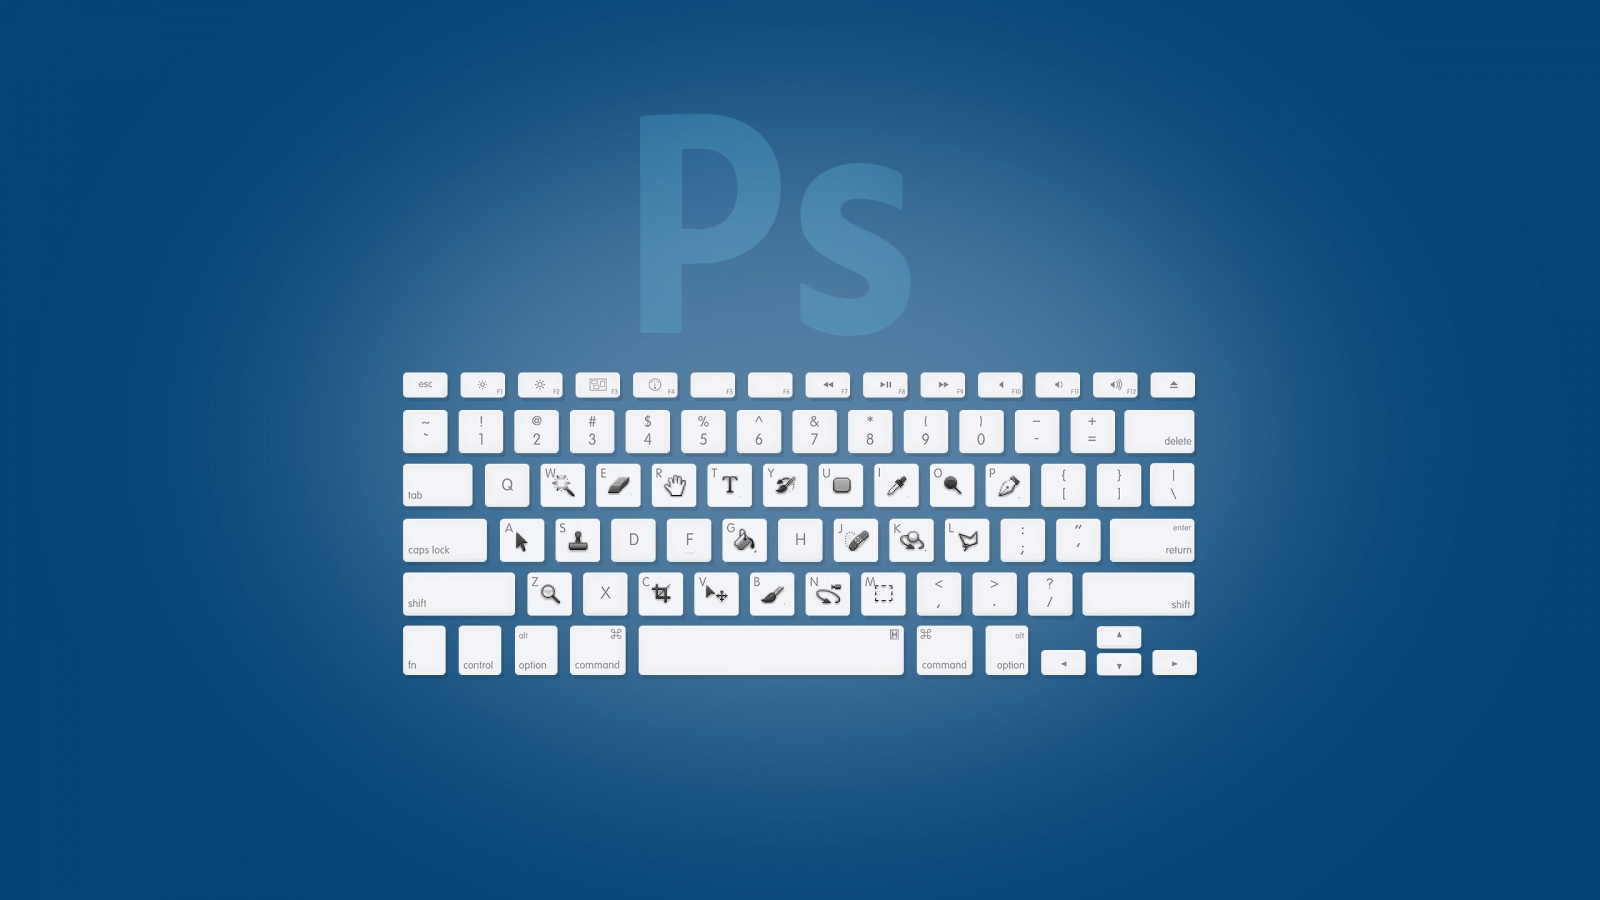 Photoshop Keyboard for 1600 x 900 HDTV resolution